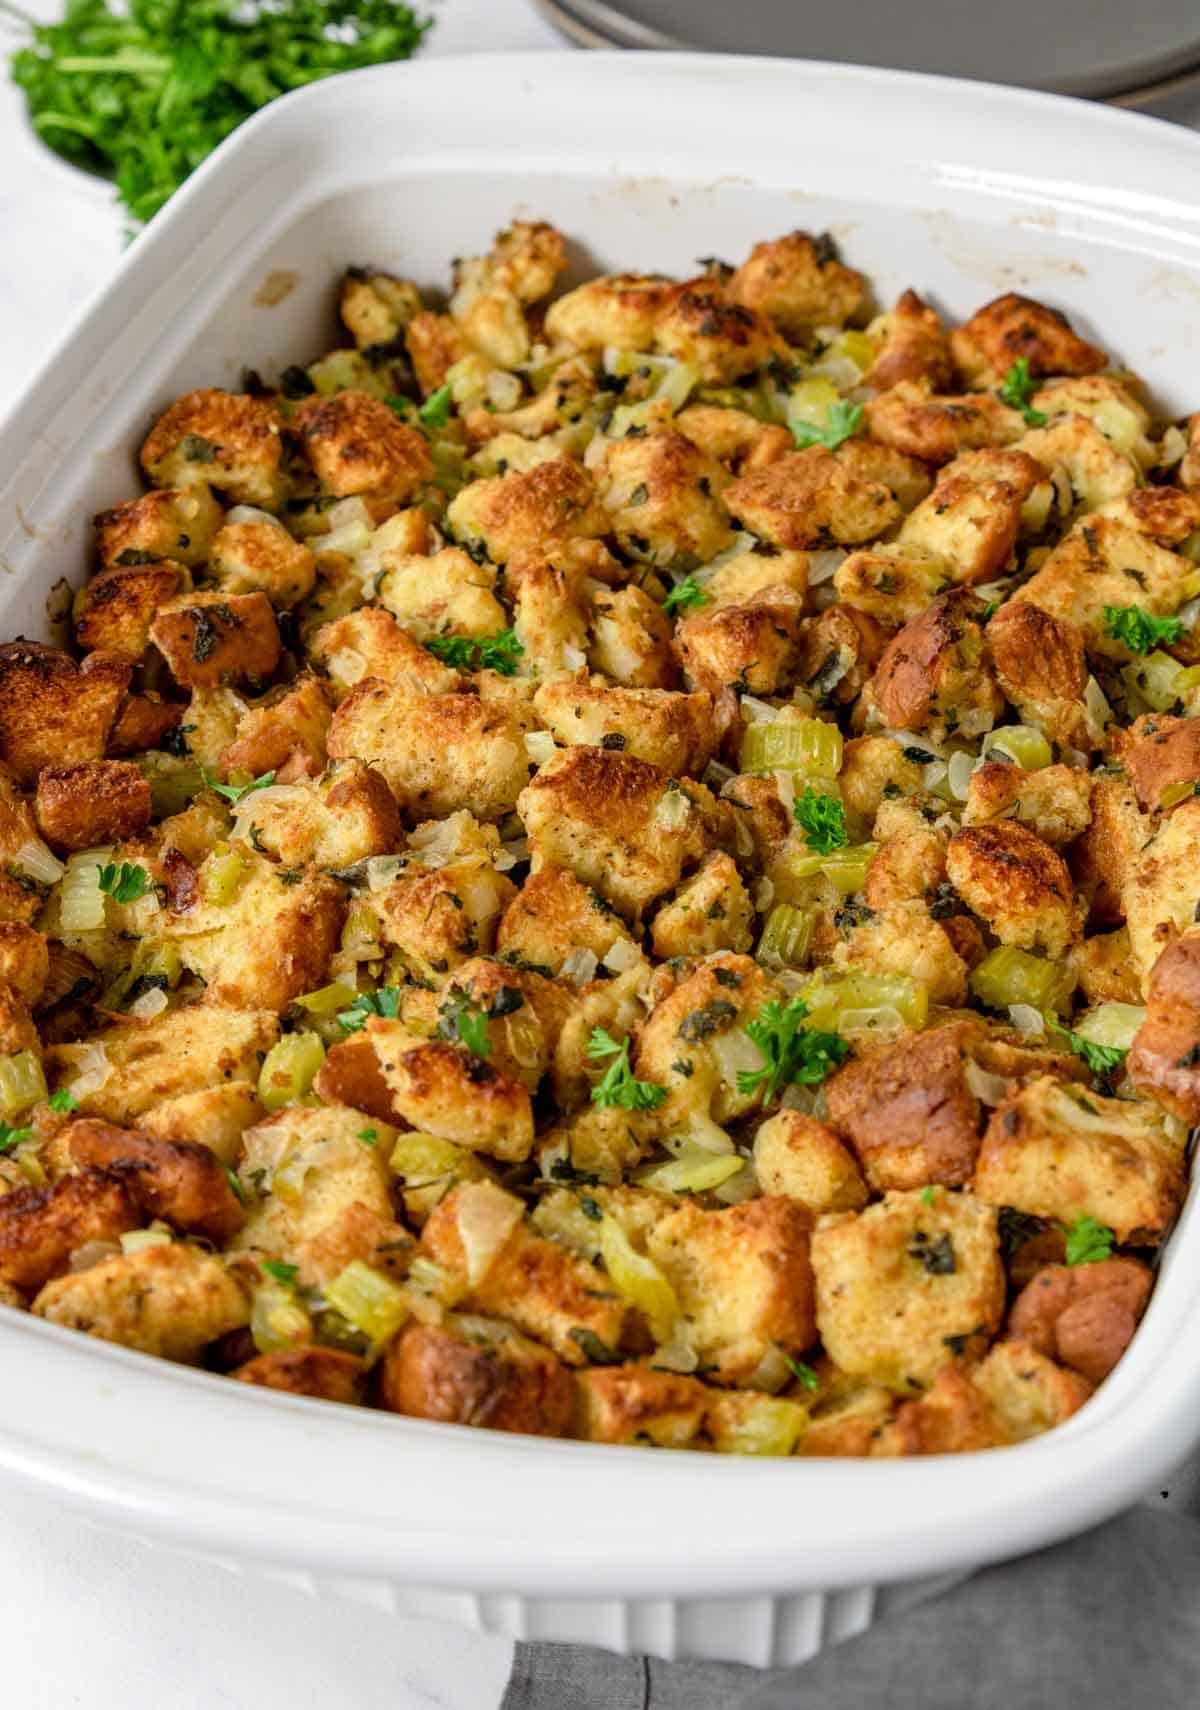 Grilled Bread Stuffing - Grilled Thanksgiving Stuffing Recipe